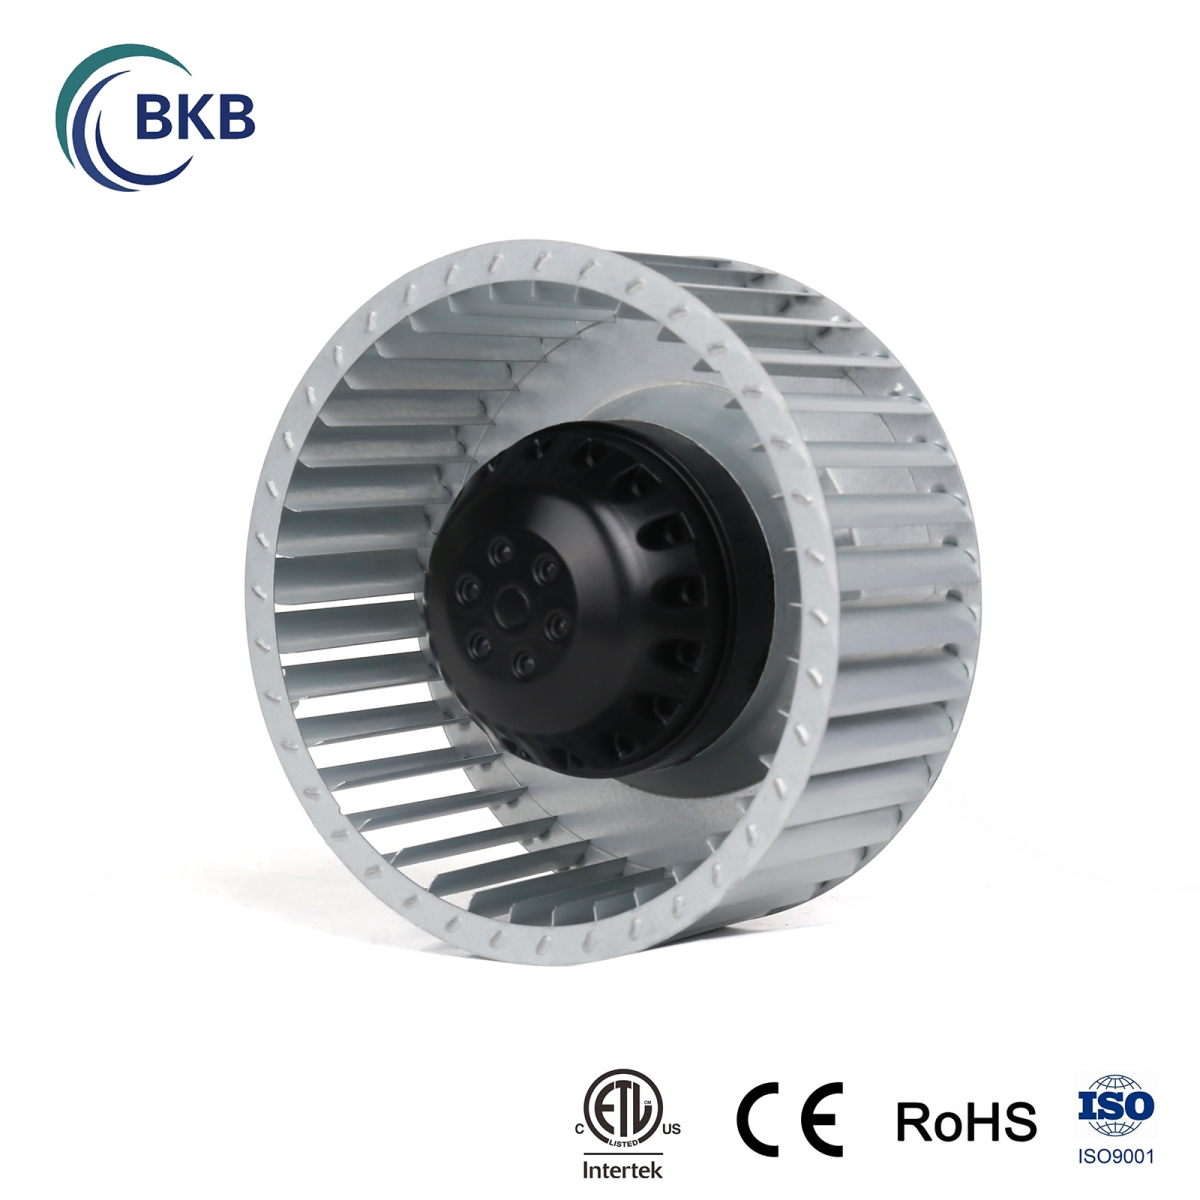 Centrifugal fans use the kinetic energy of the impeller to move the air flow.-SUNLIGHT BLOWER,Centrifugal Fans, Inline Fans,Motors,Backward curved centrifugal fans ,Forward curved centrifugal fans ,inlet fans, EC fans